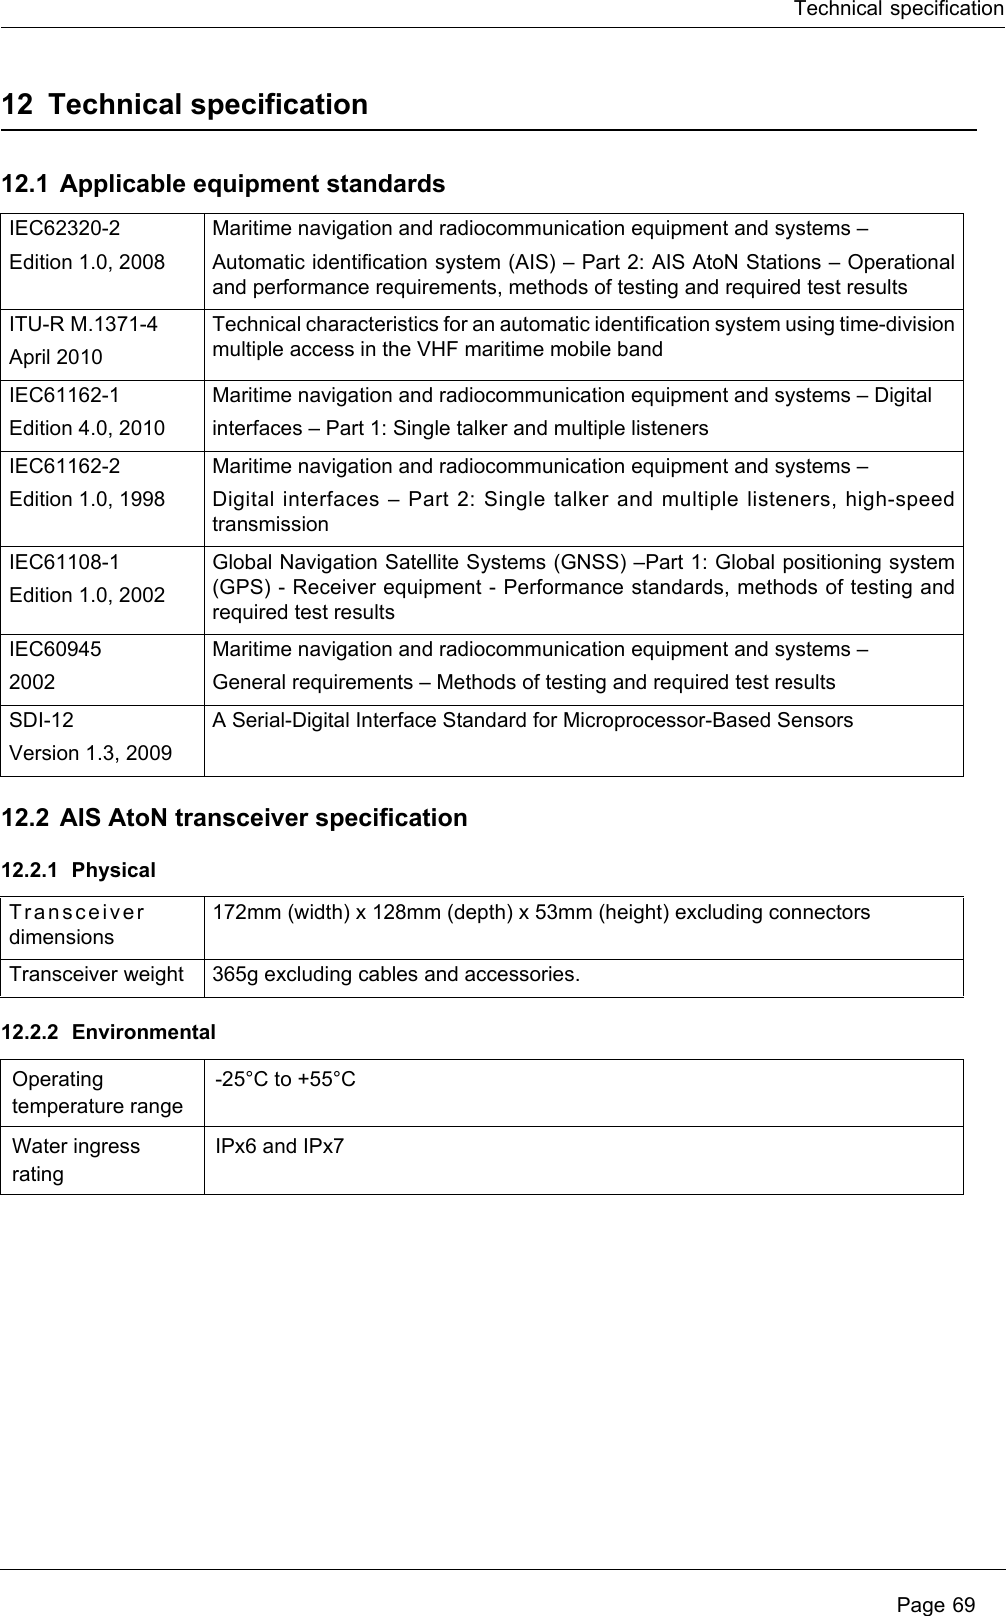 Technical specification Page 6912 Technical specification12.1 Applicable equipment standards12.2 AIS AtoN transceiver specification12.2.1 Physical12.2.2 EnvironmentalIEC62320-2Edition 1.0, 2008Maritime navigation and radiocommunication equipment and systems –Automatic identification system (AIS) – Part 2: AIS AtoN Stations – Operational and performance requirements, methods of testing and required test resultsITU-R M.1371-4April 2010Technical characteristics for an automatic identification system using time-division multiple access in the VHF maritime mobile bandIEC61162-1Edition 4.0, 2010Maritime navigation and radiocommunication equipment and systems – Digitalinterfaces – Part 1: Single talker and multiple listenersIEC61162-2Edition 1.0, 1998Maritime navigation and radiocommunication equipment and systems –Digital interfaces – Part 2: Single talker and multiple listeners, high-speed transmissionIEC61108-1Edition 1.0, 2002Global Navigation Satellite Systems (GNSS) –Part 1: Global positioning system (GPS) - Receiver equipment - Performance standards, methods of testing and required test resultsIEC60945 2002Maritime navigation and radiocommunication equipment and systems –General requirements – Methods of testing and required test resultsSDI-12Version 1.3, 2009A Serial-Digital Interface Standard for Microprocessor-Based SensorsTransceiver dimensions172mm (width) x 128mm (depth) x 53mm (height) excluding connectorsTransceiver weight 365g excluding cables and accessories.Operating temperature range-25°C to +55°CWater ingress ratingIPx6 and IPx7